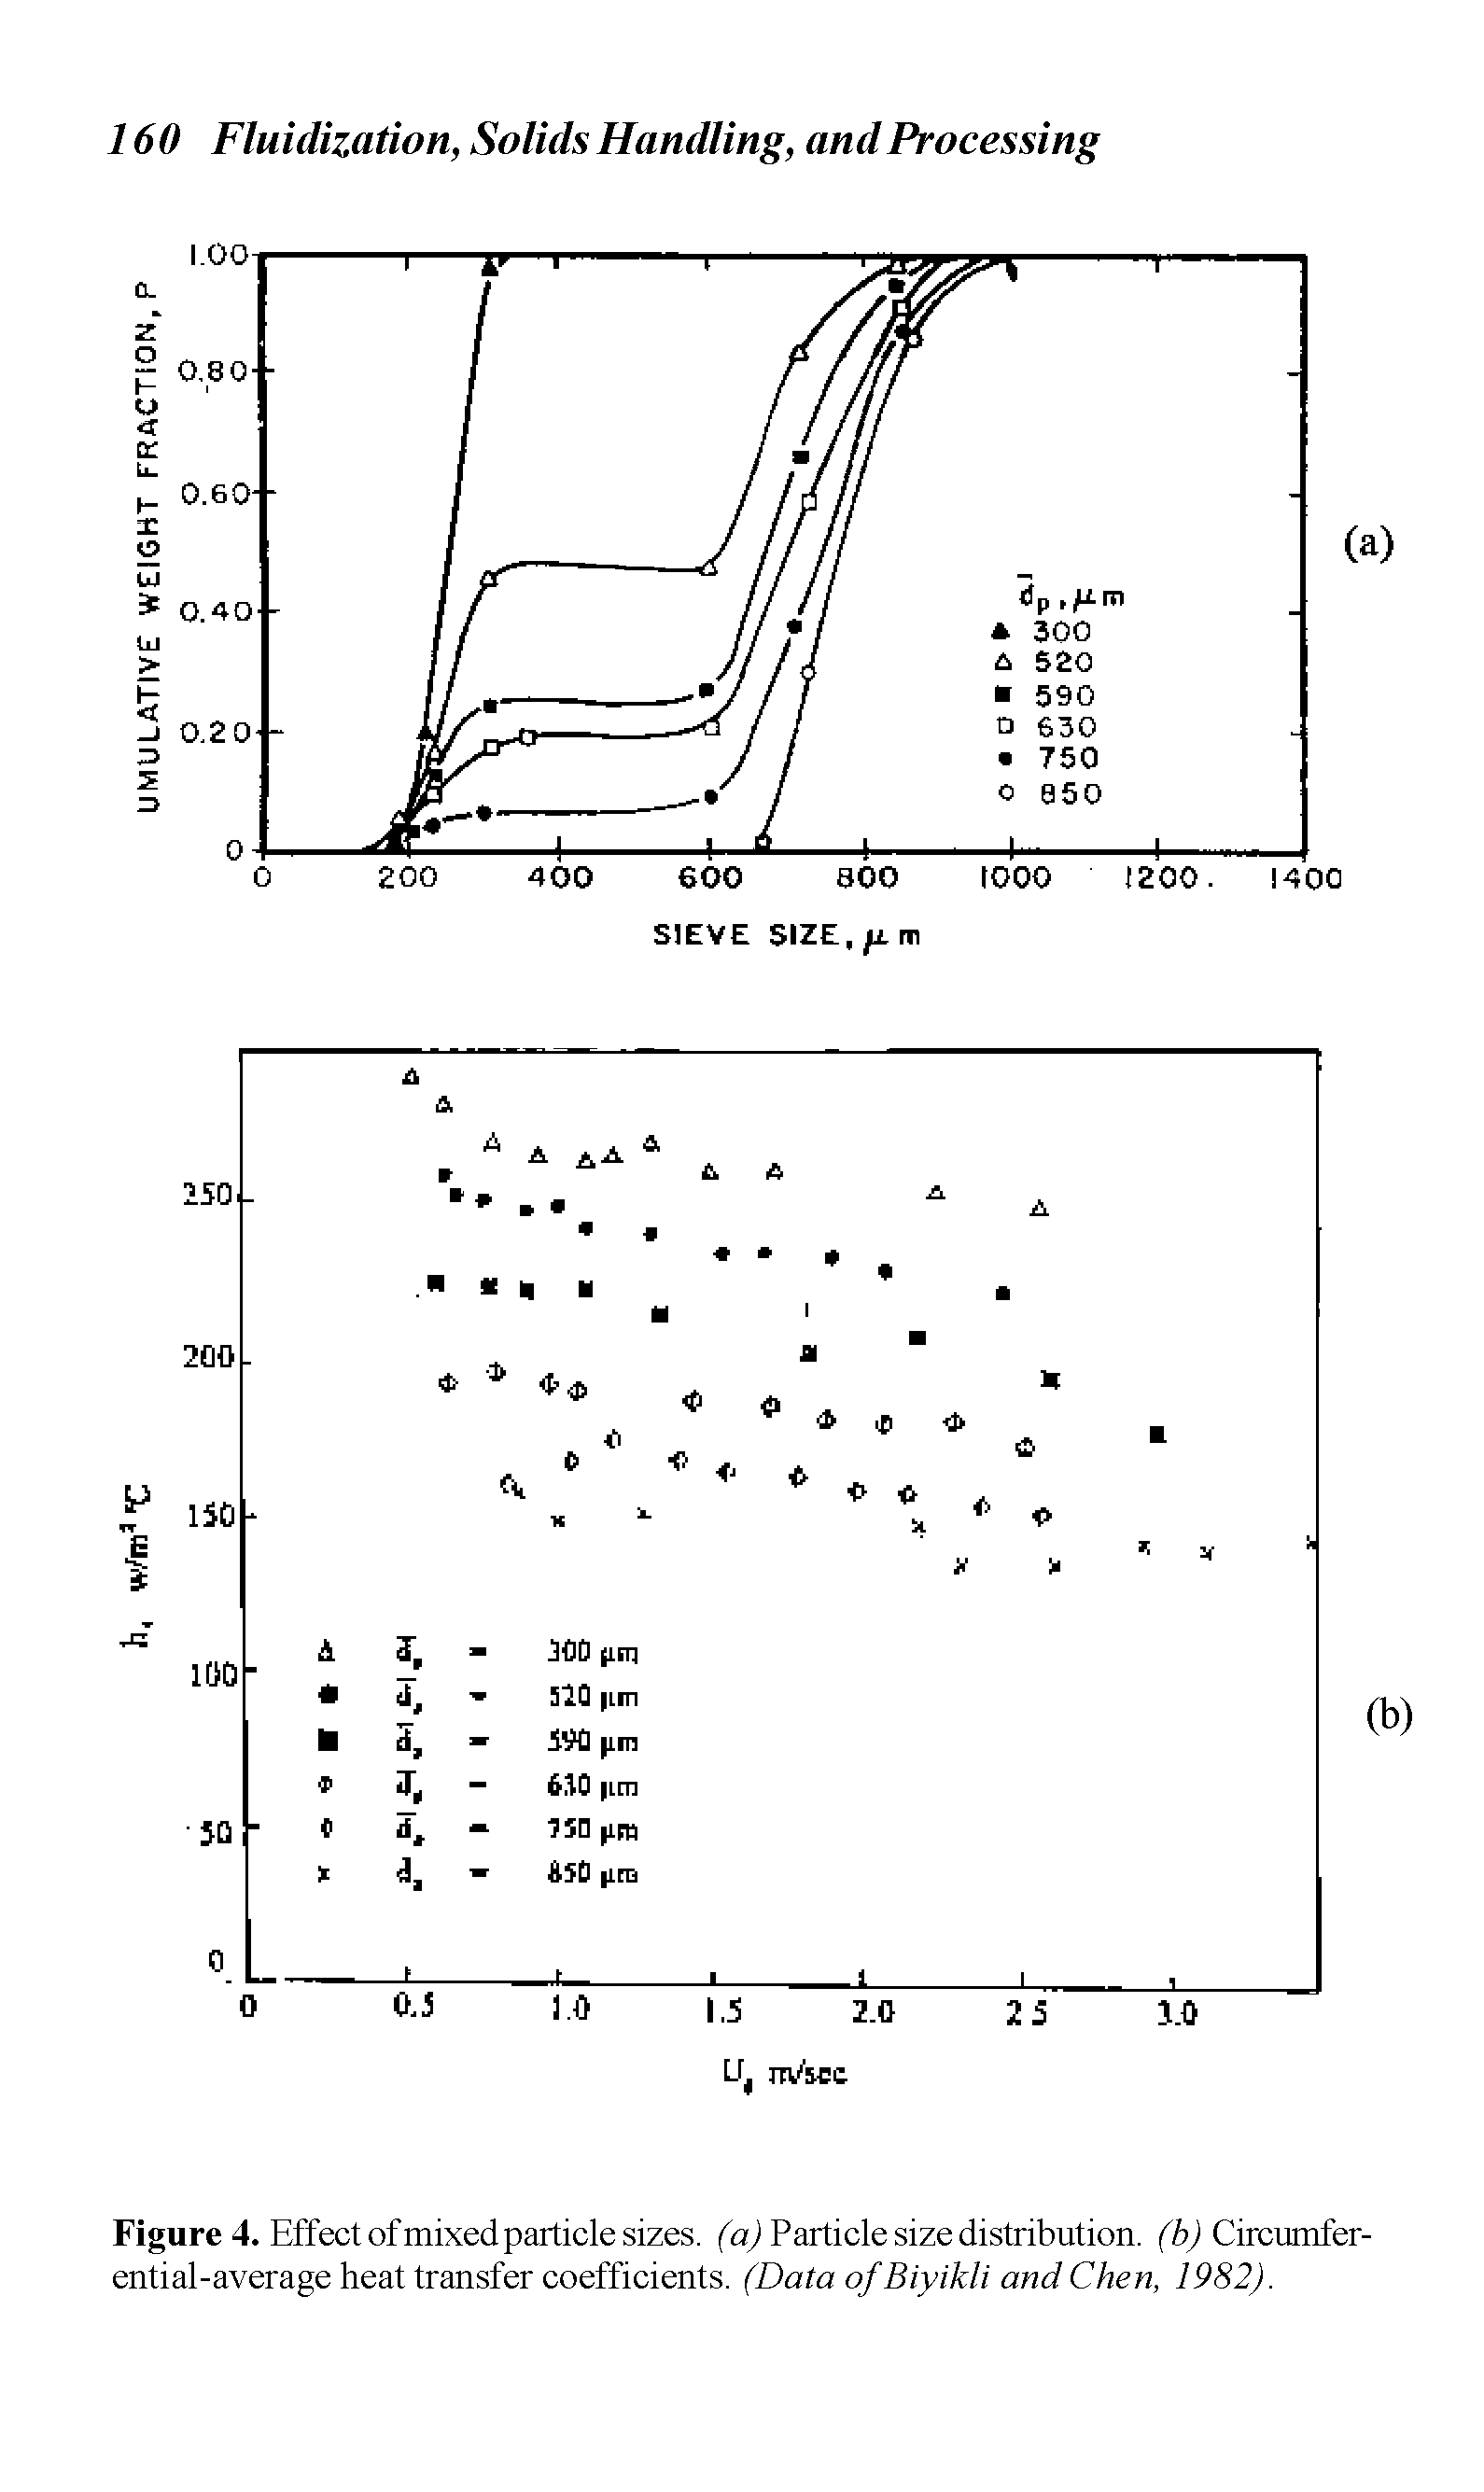 Figure 4. Effect ofmixed particle sizes, (a) Particle size distribution, (b) Circumferential-average heat transfer coefficients. (Data ofBiyikli and Chen, 1982).